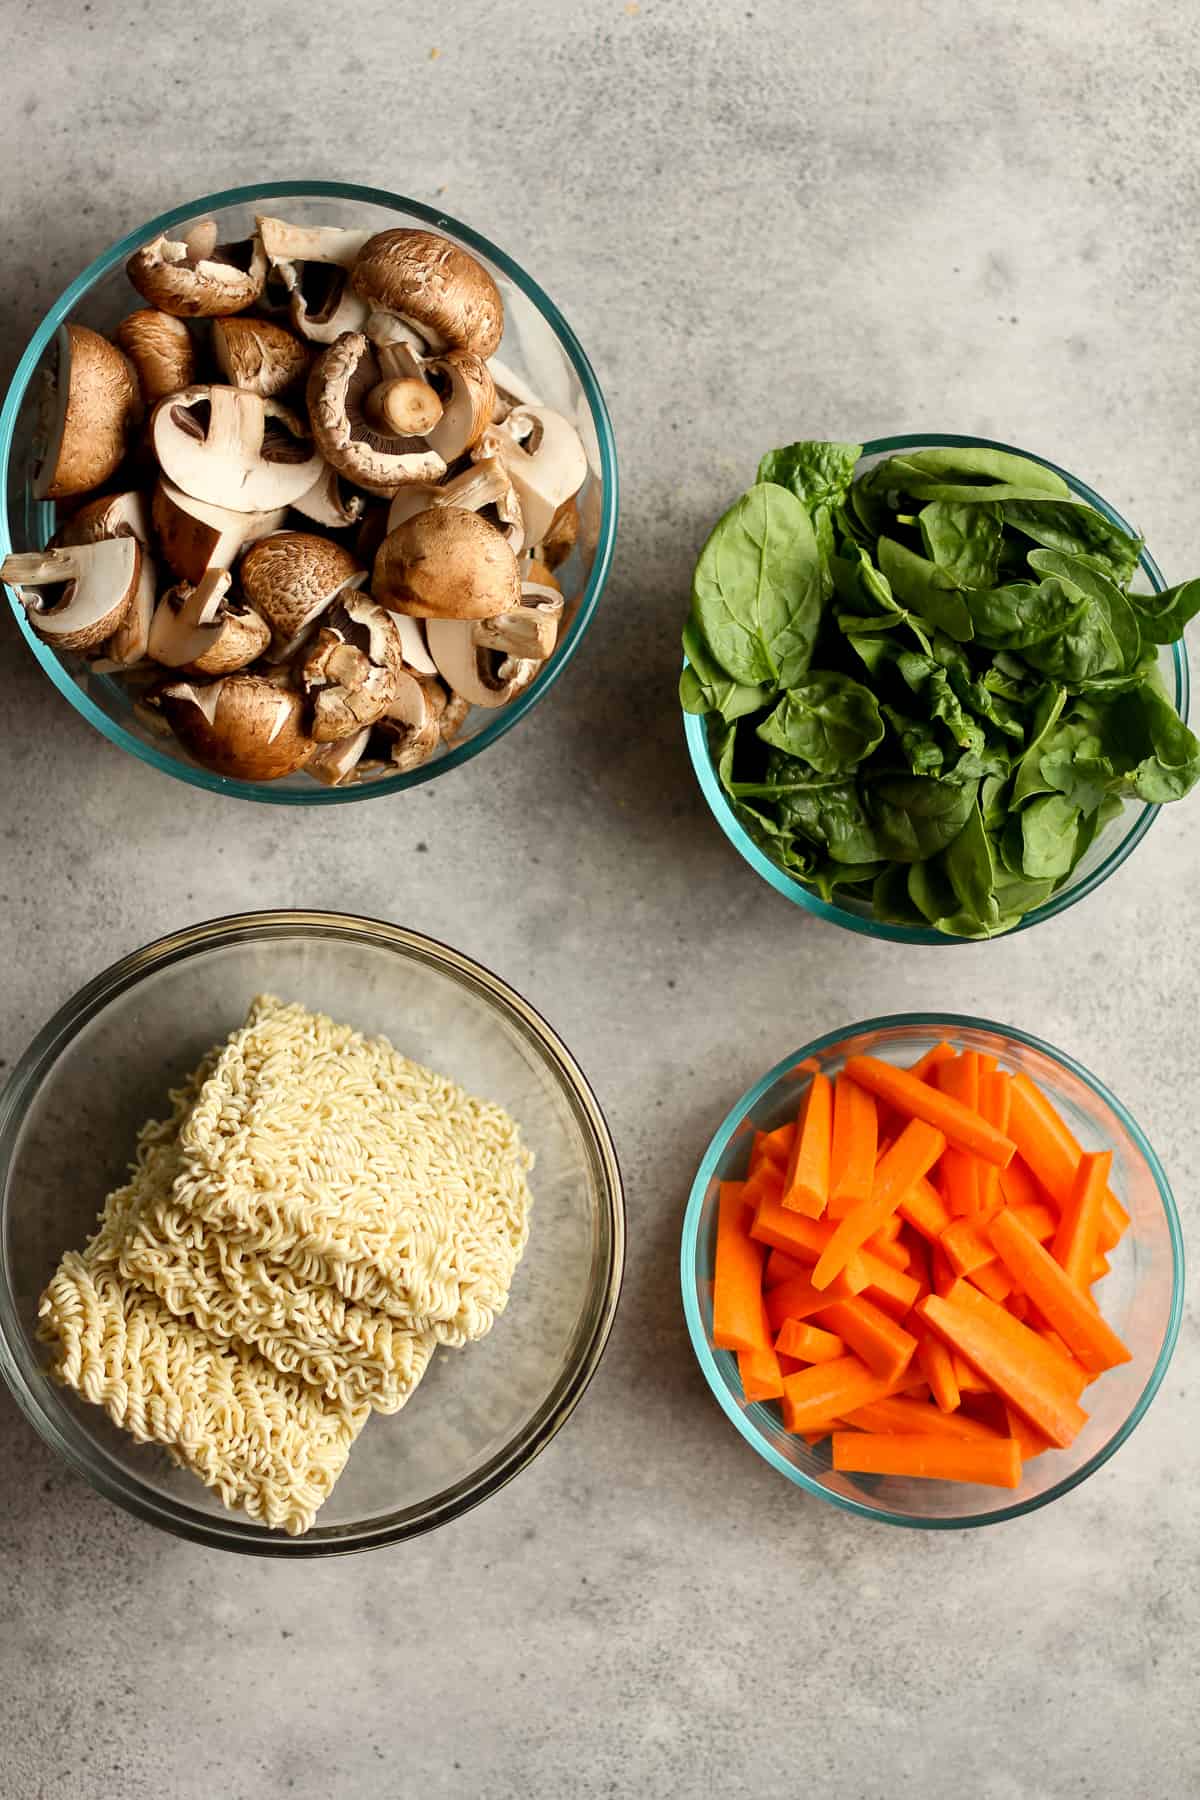 Bowls of the mushrooms, spinach, carrots, and ramen noodles.